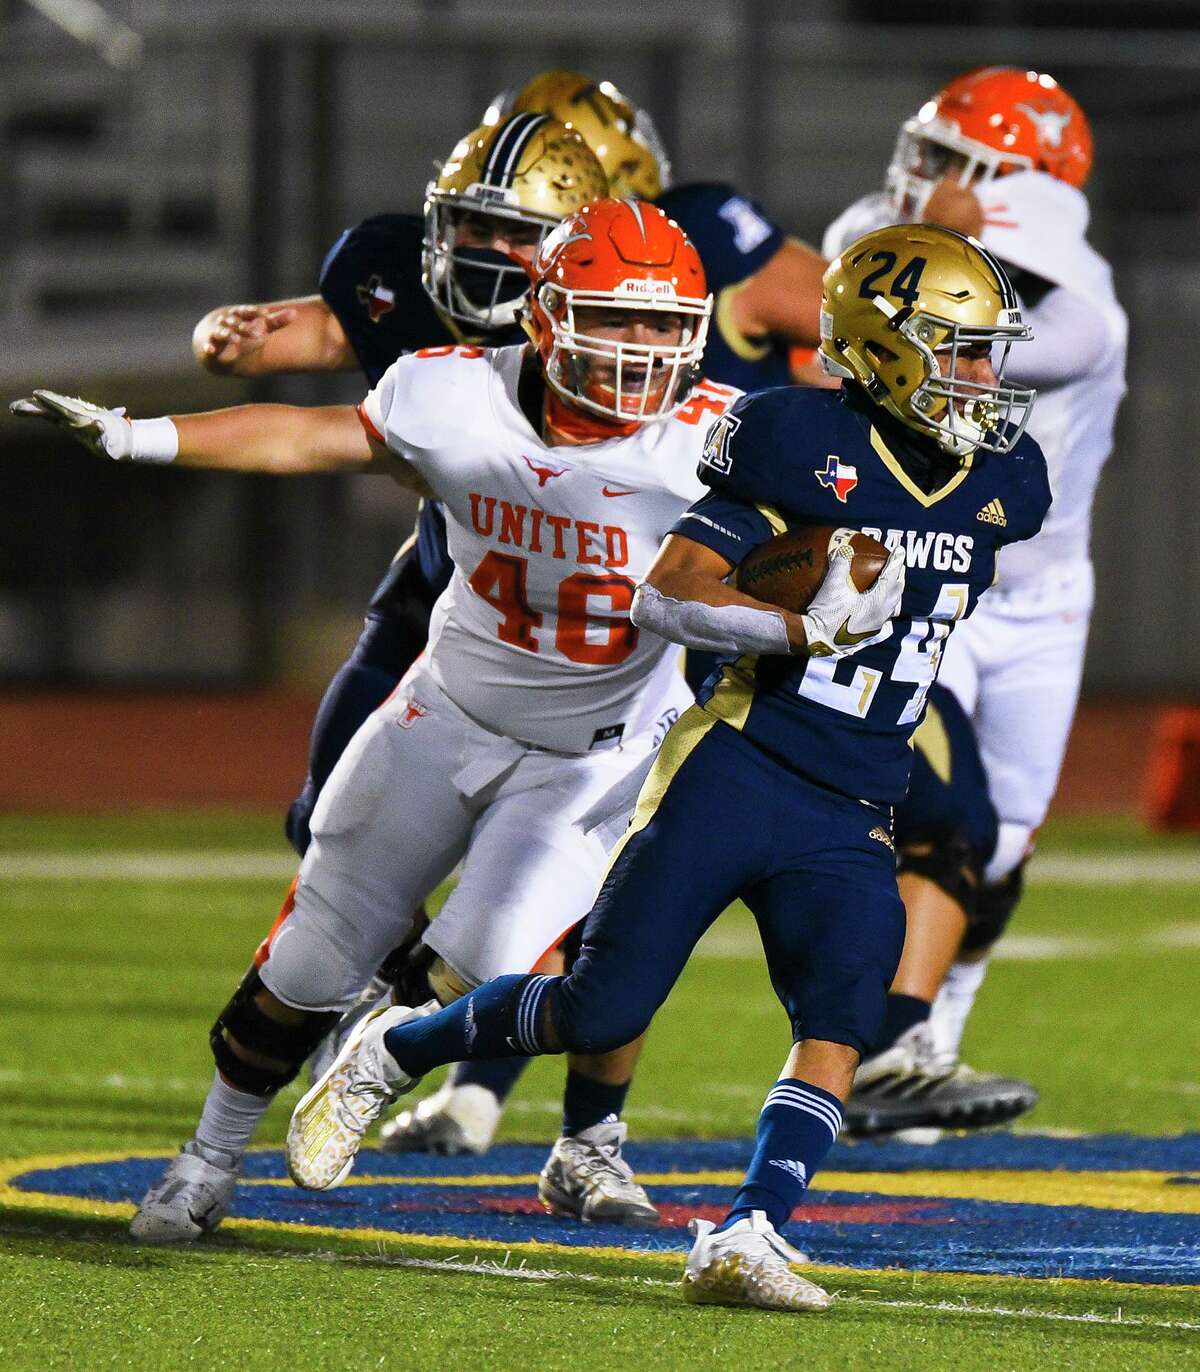 Alexander High School’s Gael Rodriguez runs the ball as United High School’s Gael Soto closes in for the tackle, Friday, Dec. 4, 2020, at the UISD Student Activity Complex. Soto is among three All-District performers returning to the Longhorns’ defensive line next season.